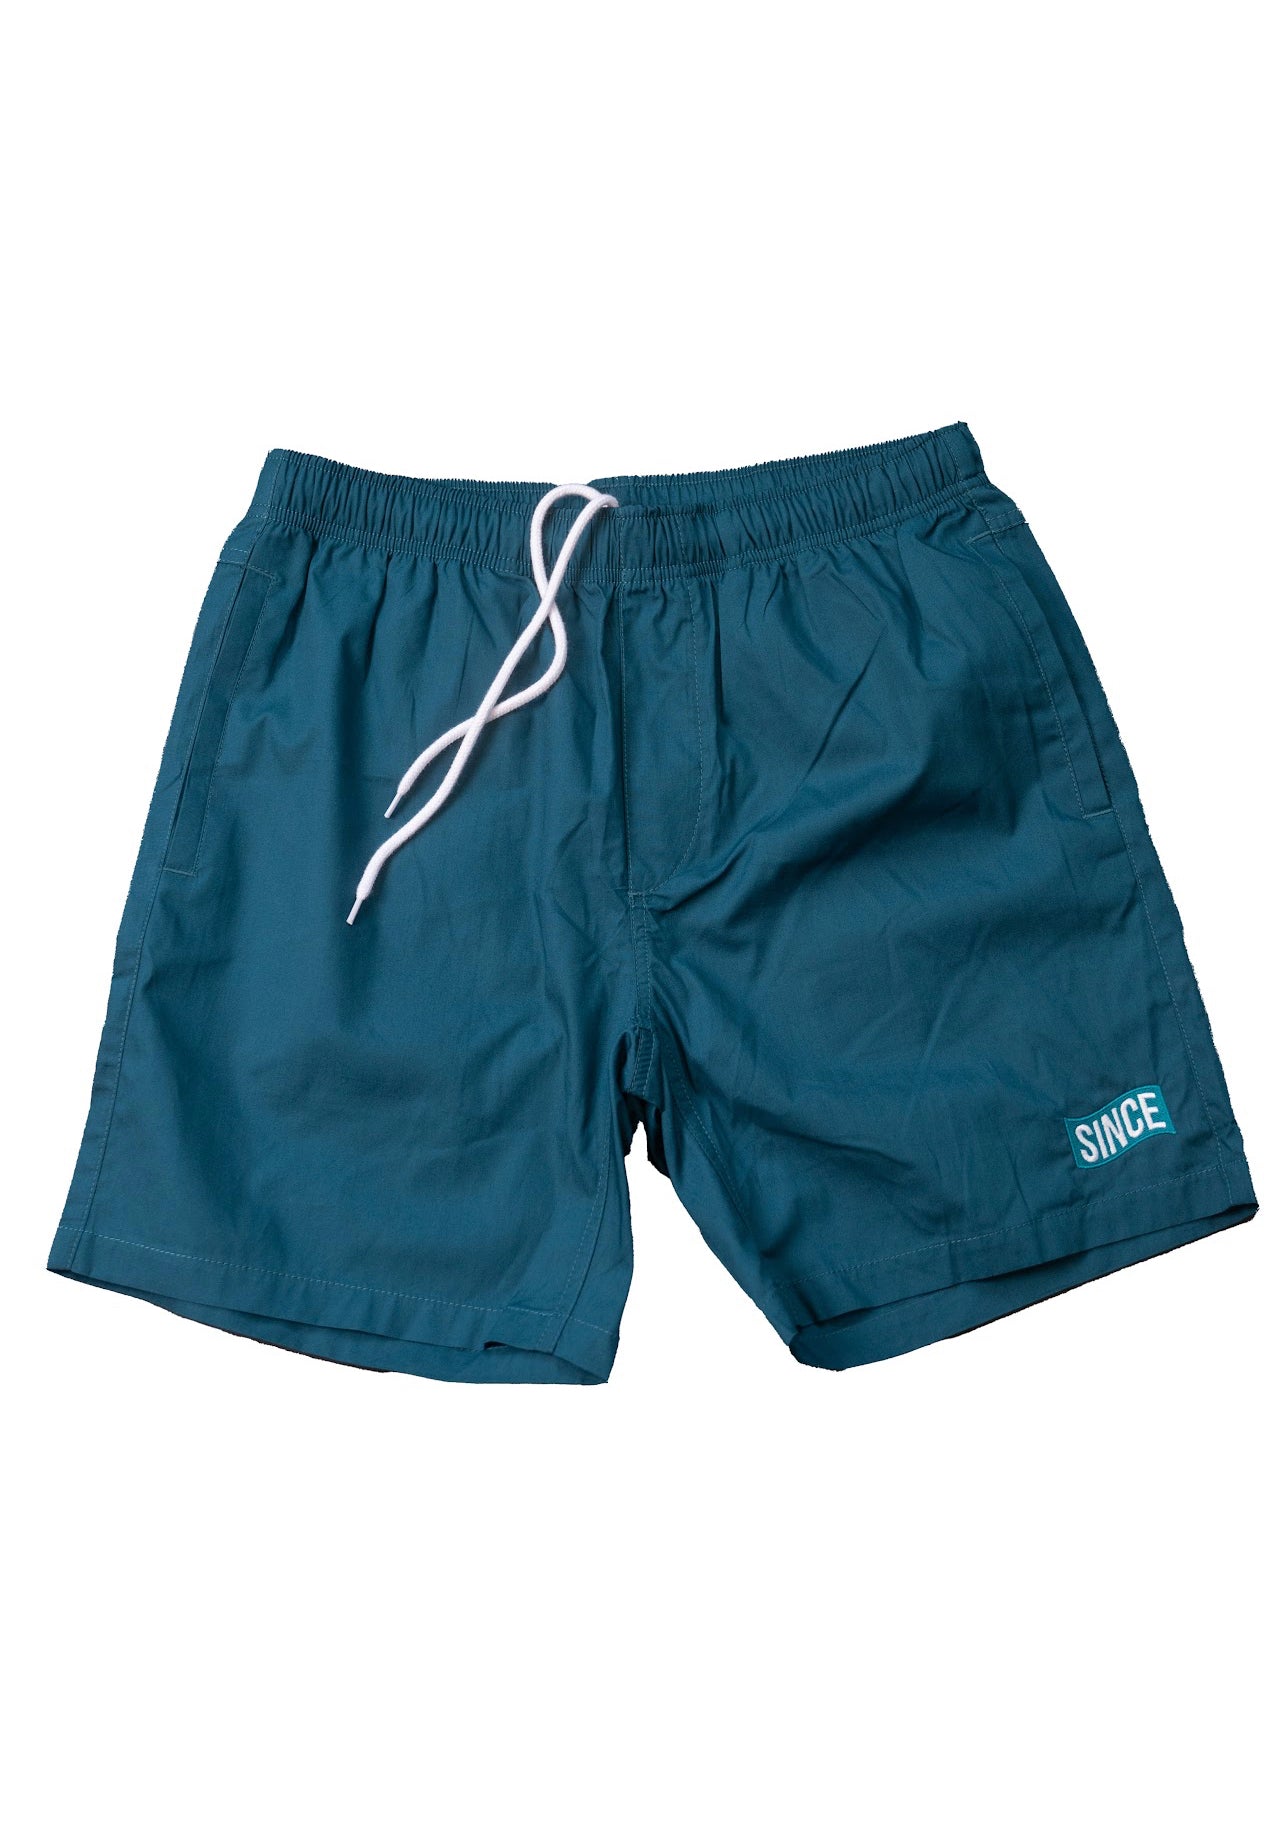 Teal Since Sand Shorts (Above The Knee)